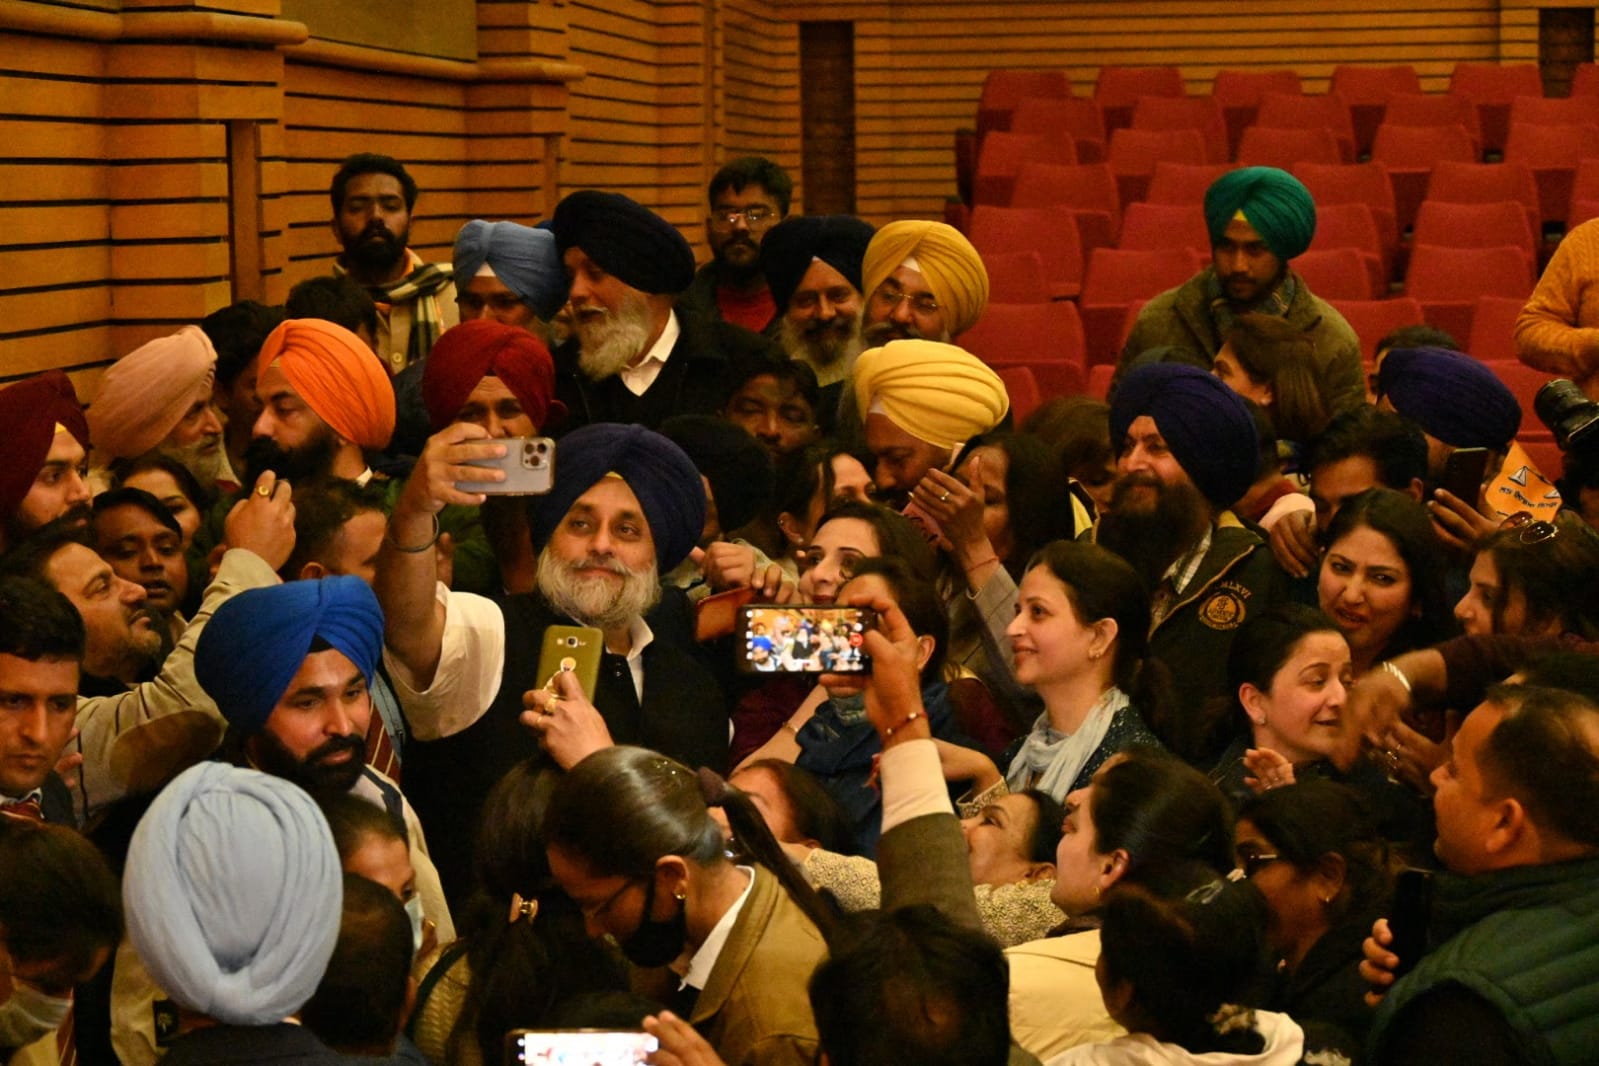 Sukhbir reveals reason for his personal bonding with Patiala at Harpal Juneja’s rally